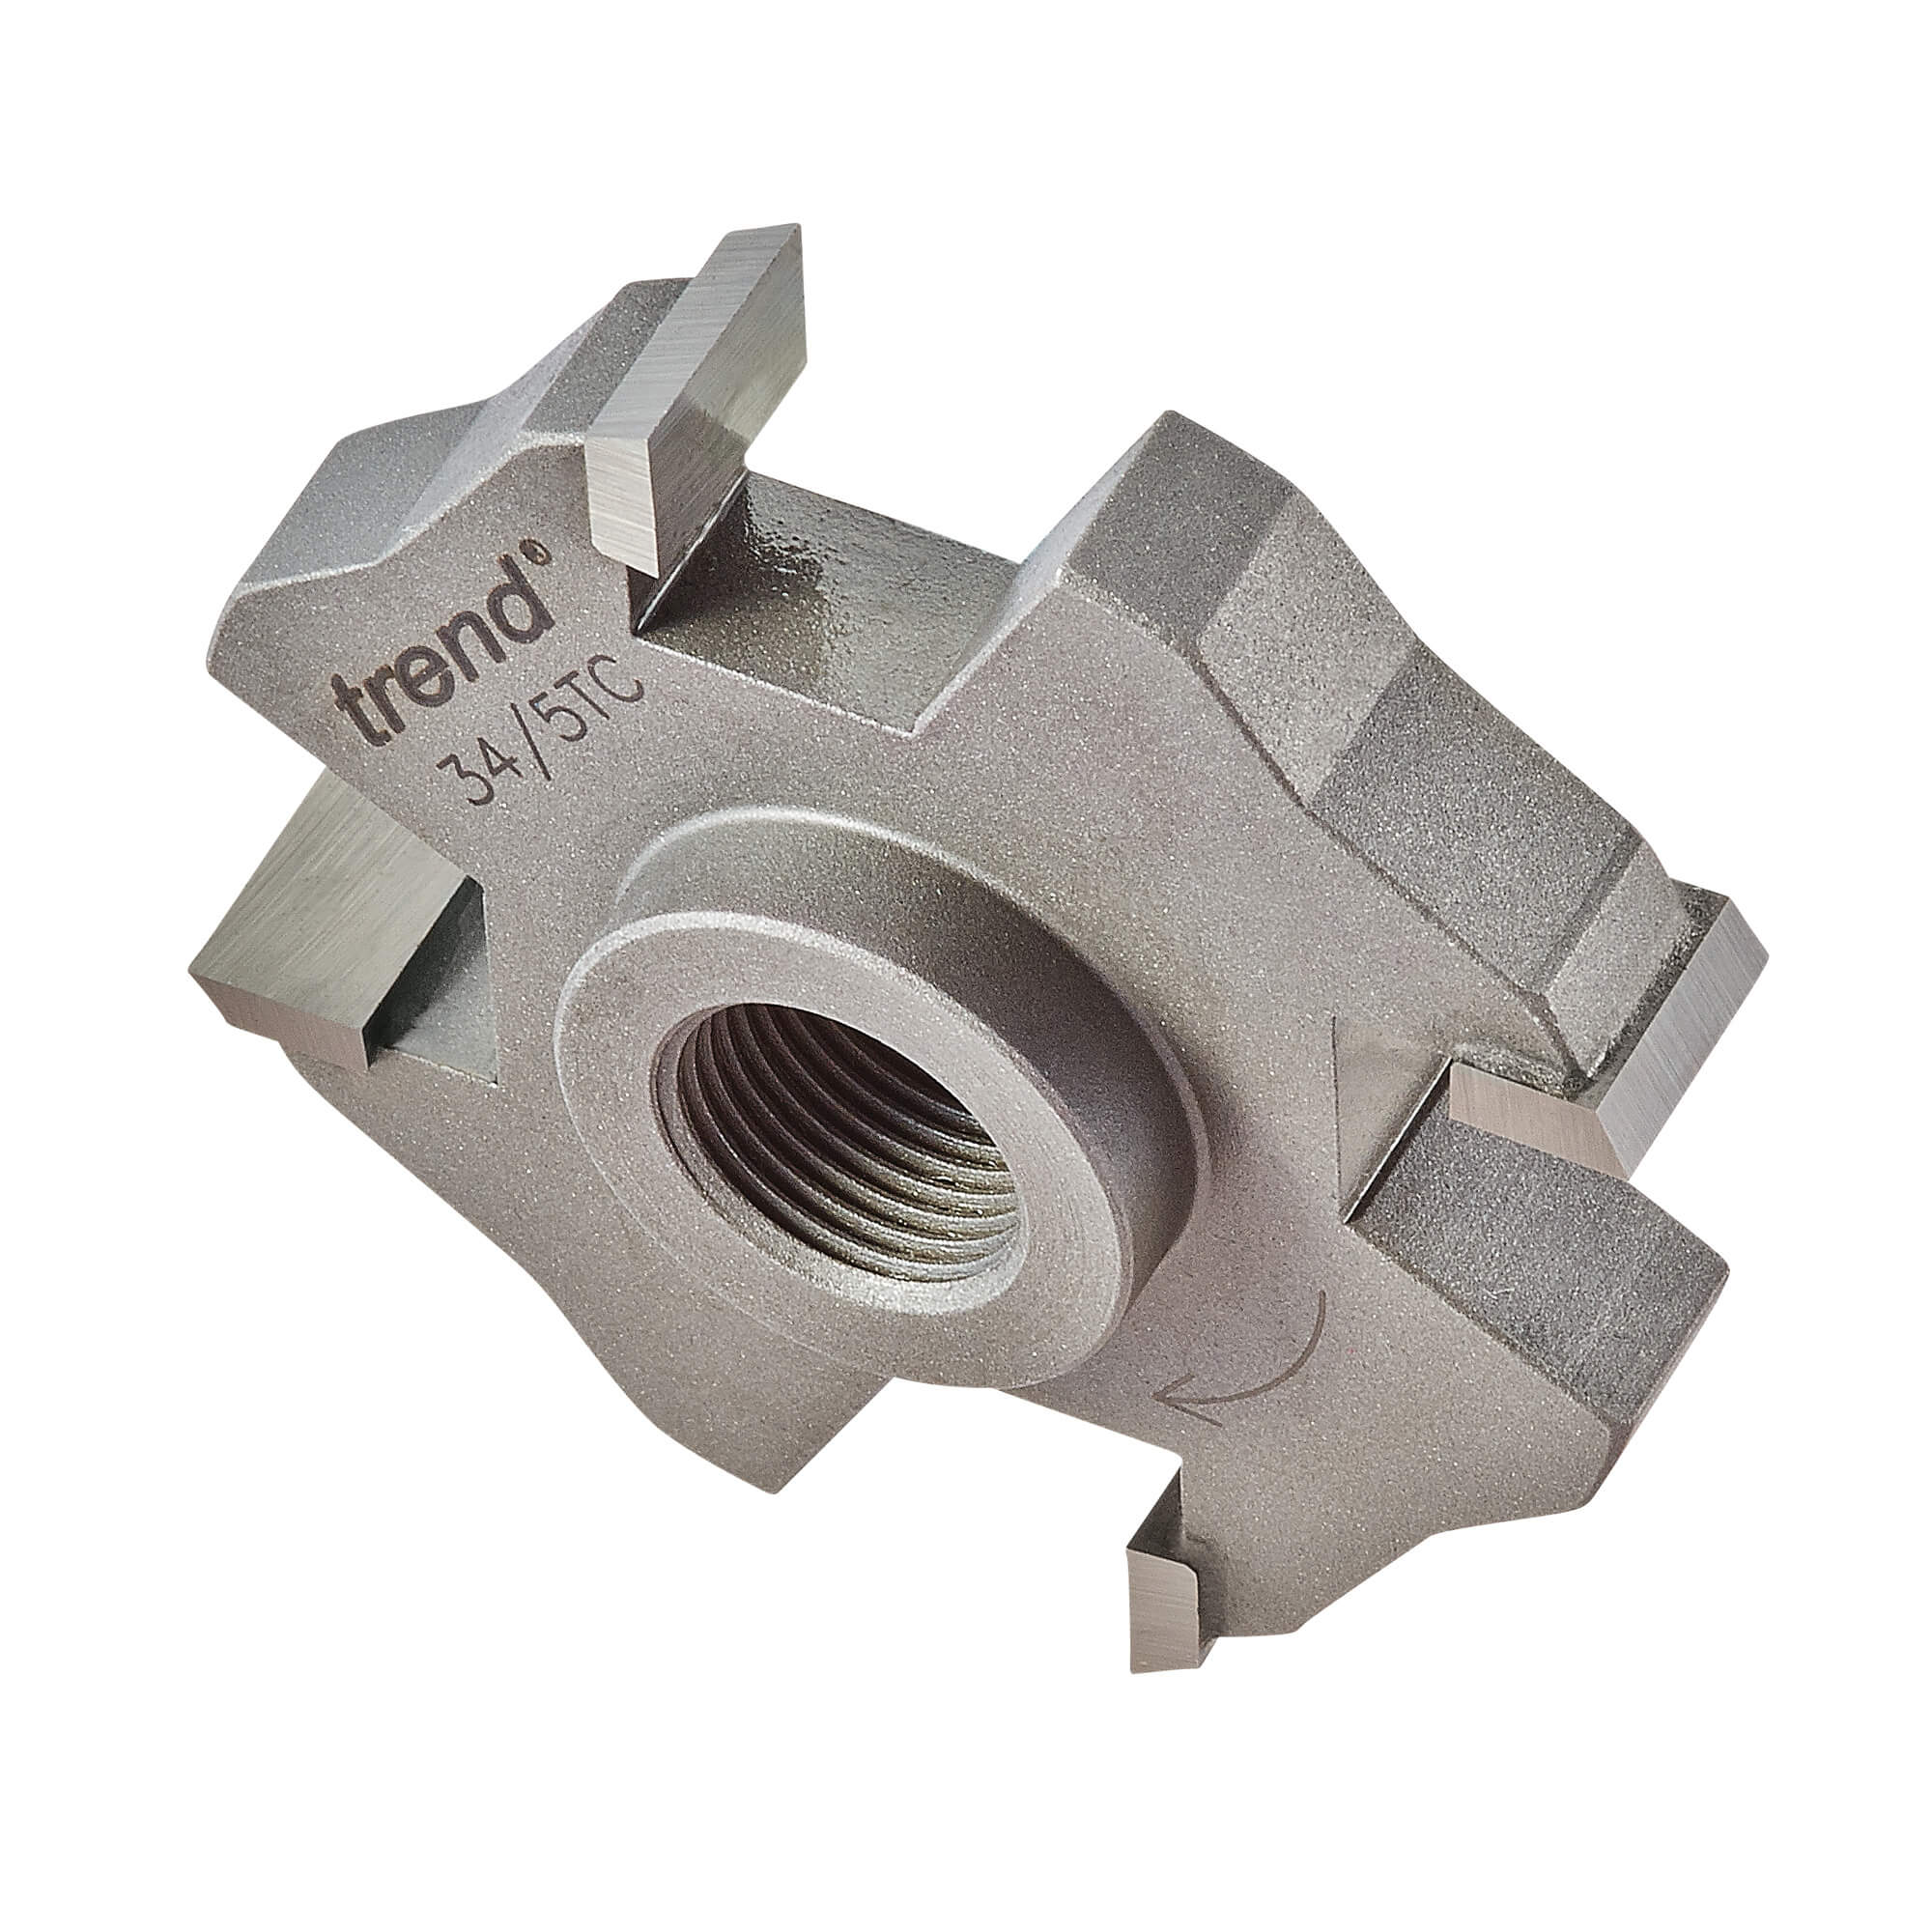 Image of Trend Threaded Slotter Blade for 33 Series M12 Arbors 50mm 9.5mm M12 Thread